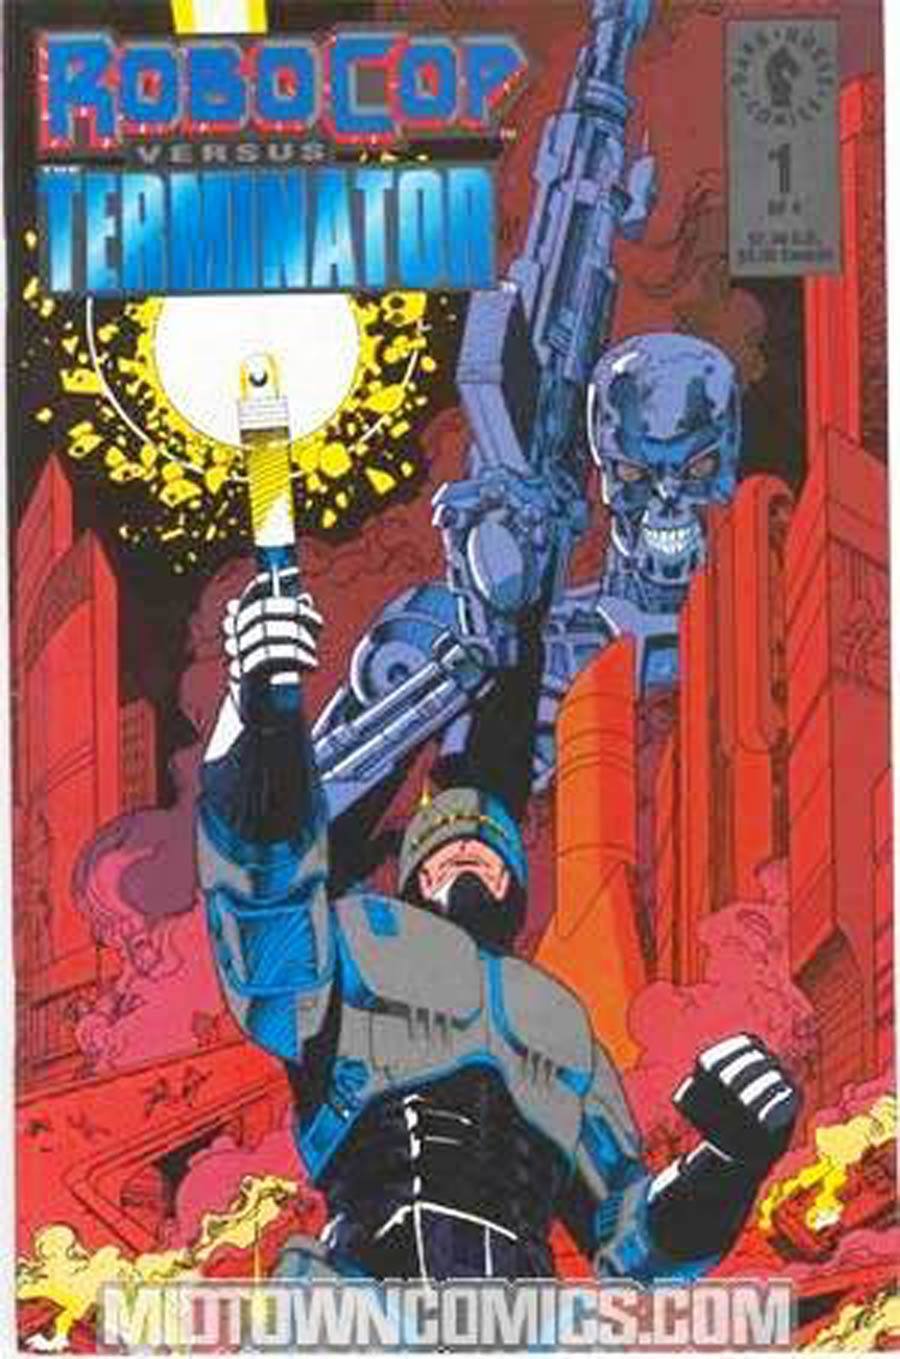 Robocop Versus The Terminator #1 Cover B Without Character Stand-Up